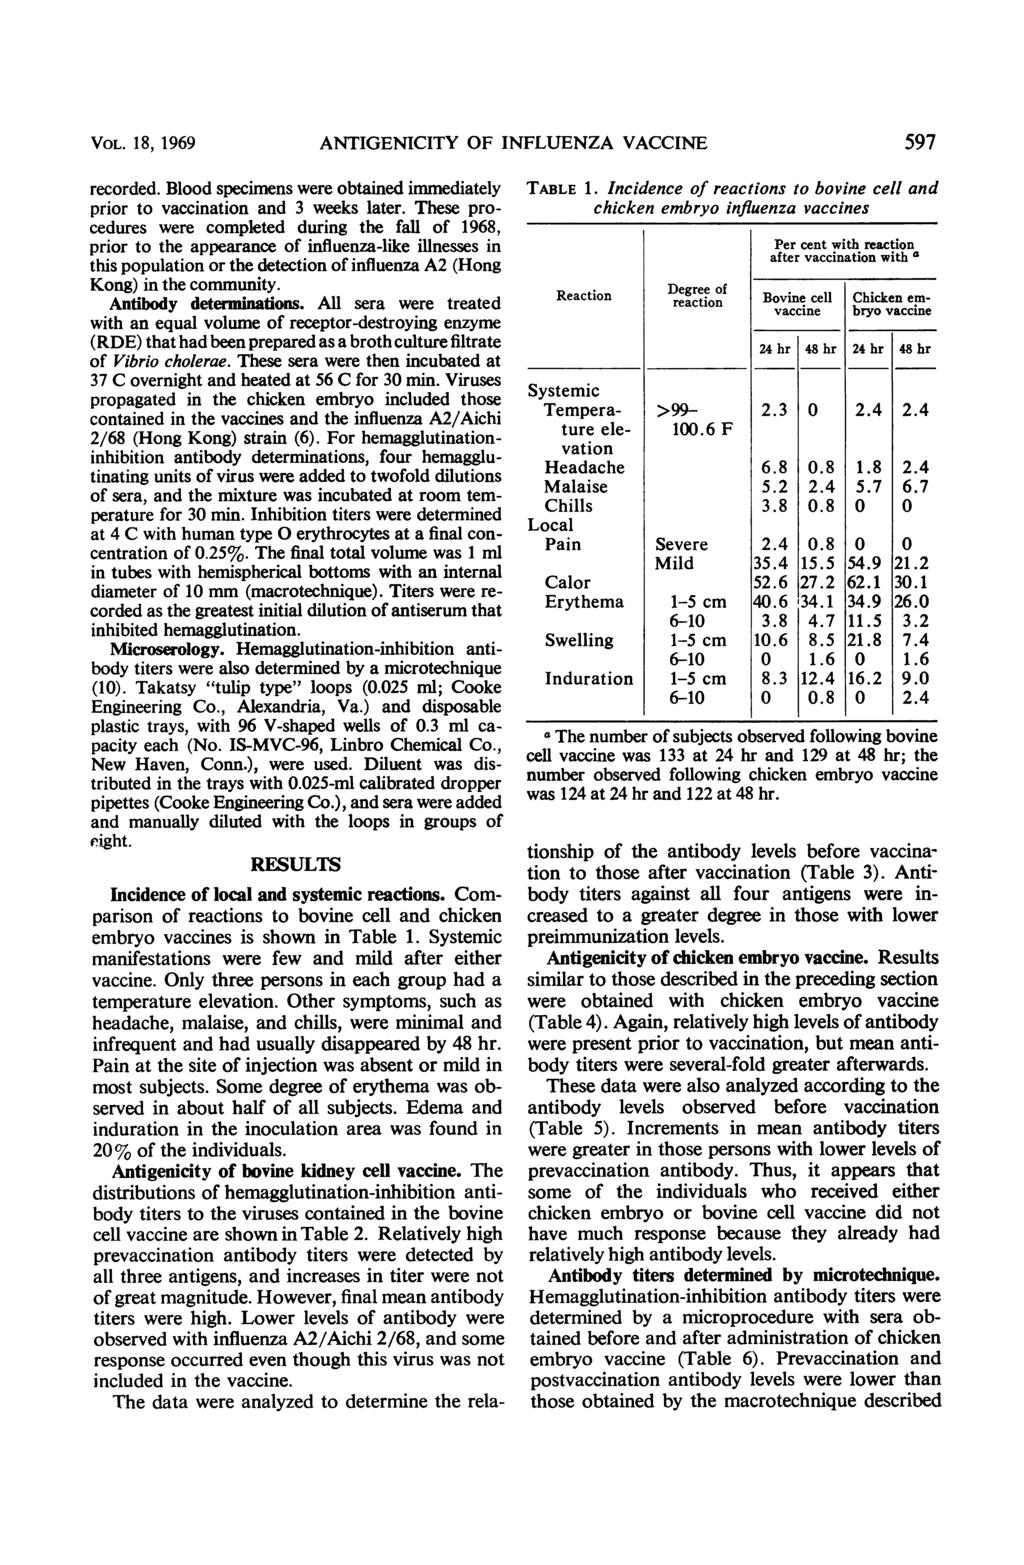 VOL. 18, 1969 ANTIGENICITY OF INFLUENZA VACCINE recorded. Blood specimens were obtained immediately prior to vaccination and 3 weeks later.